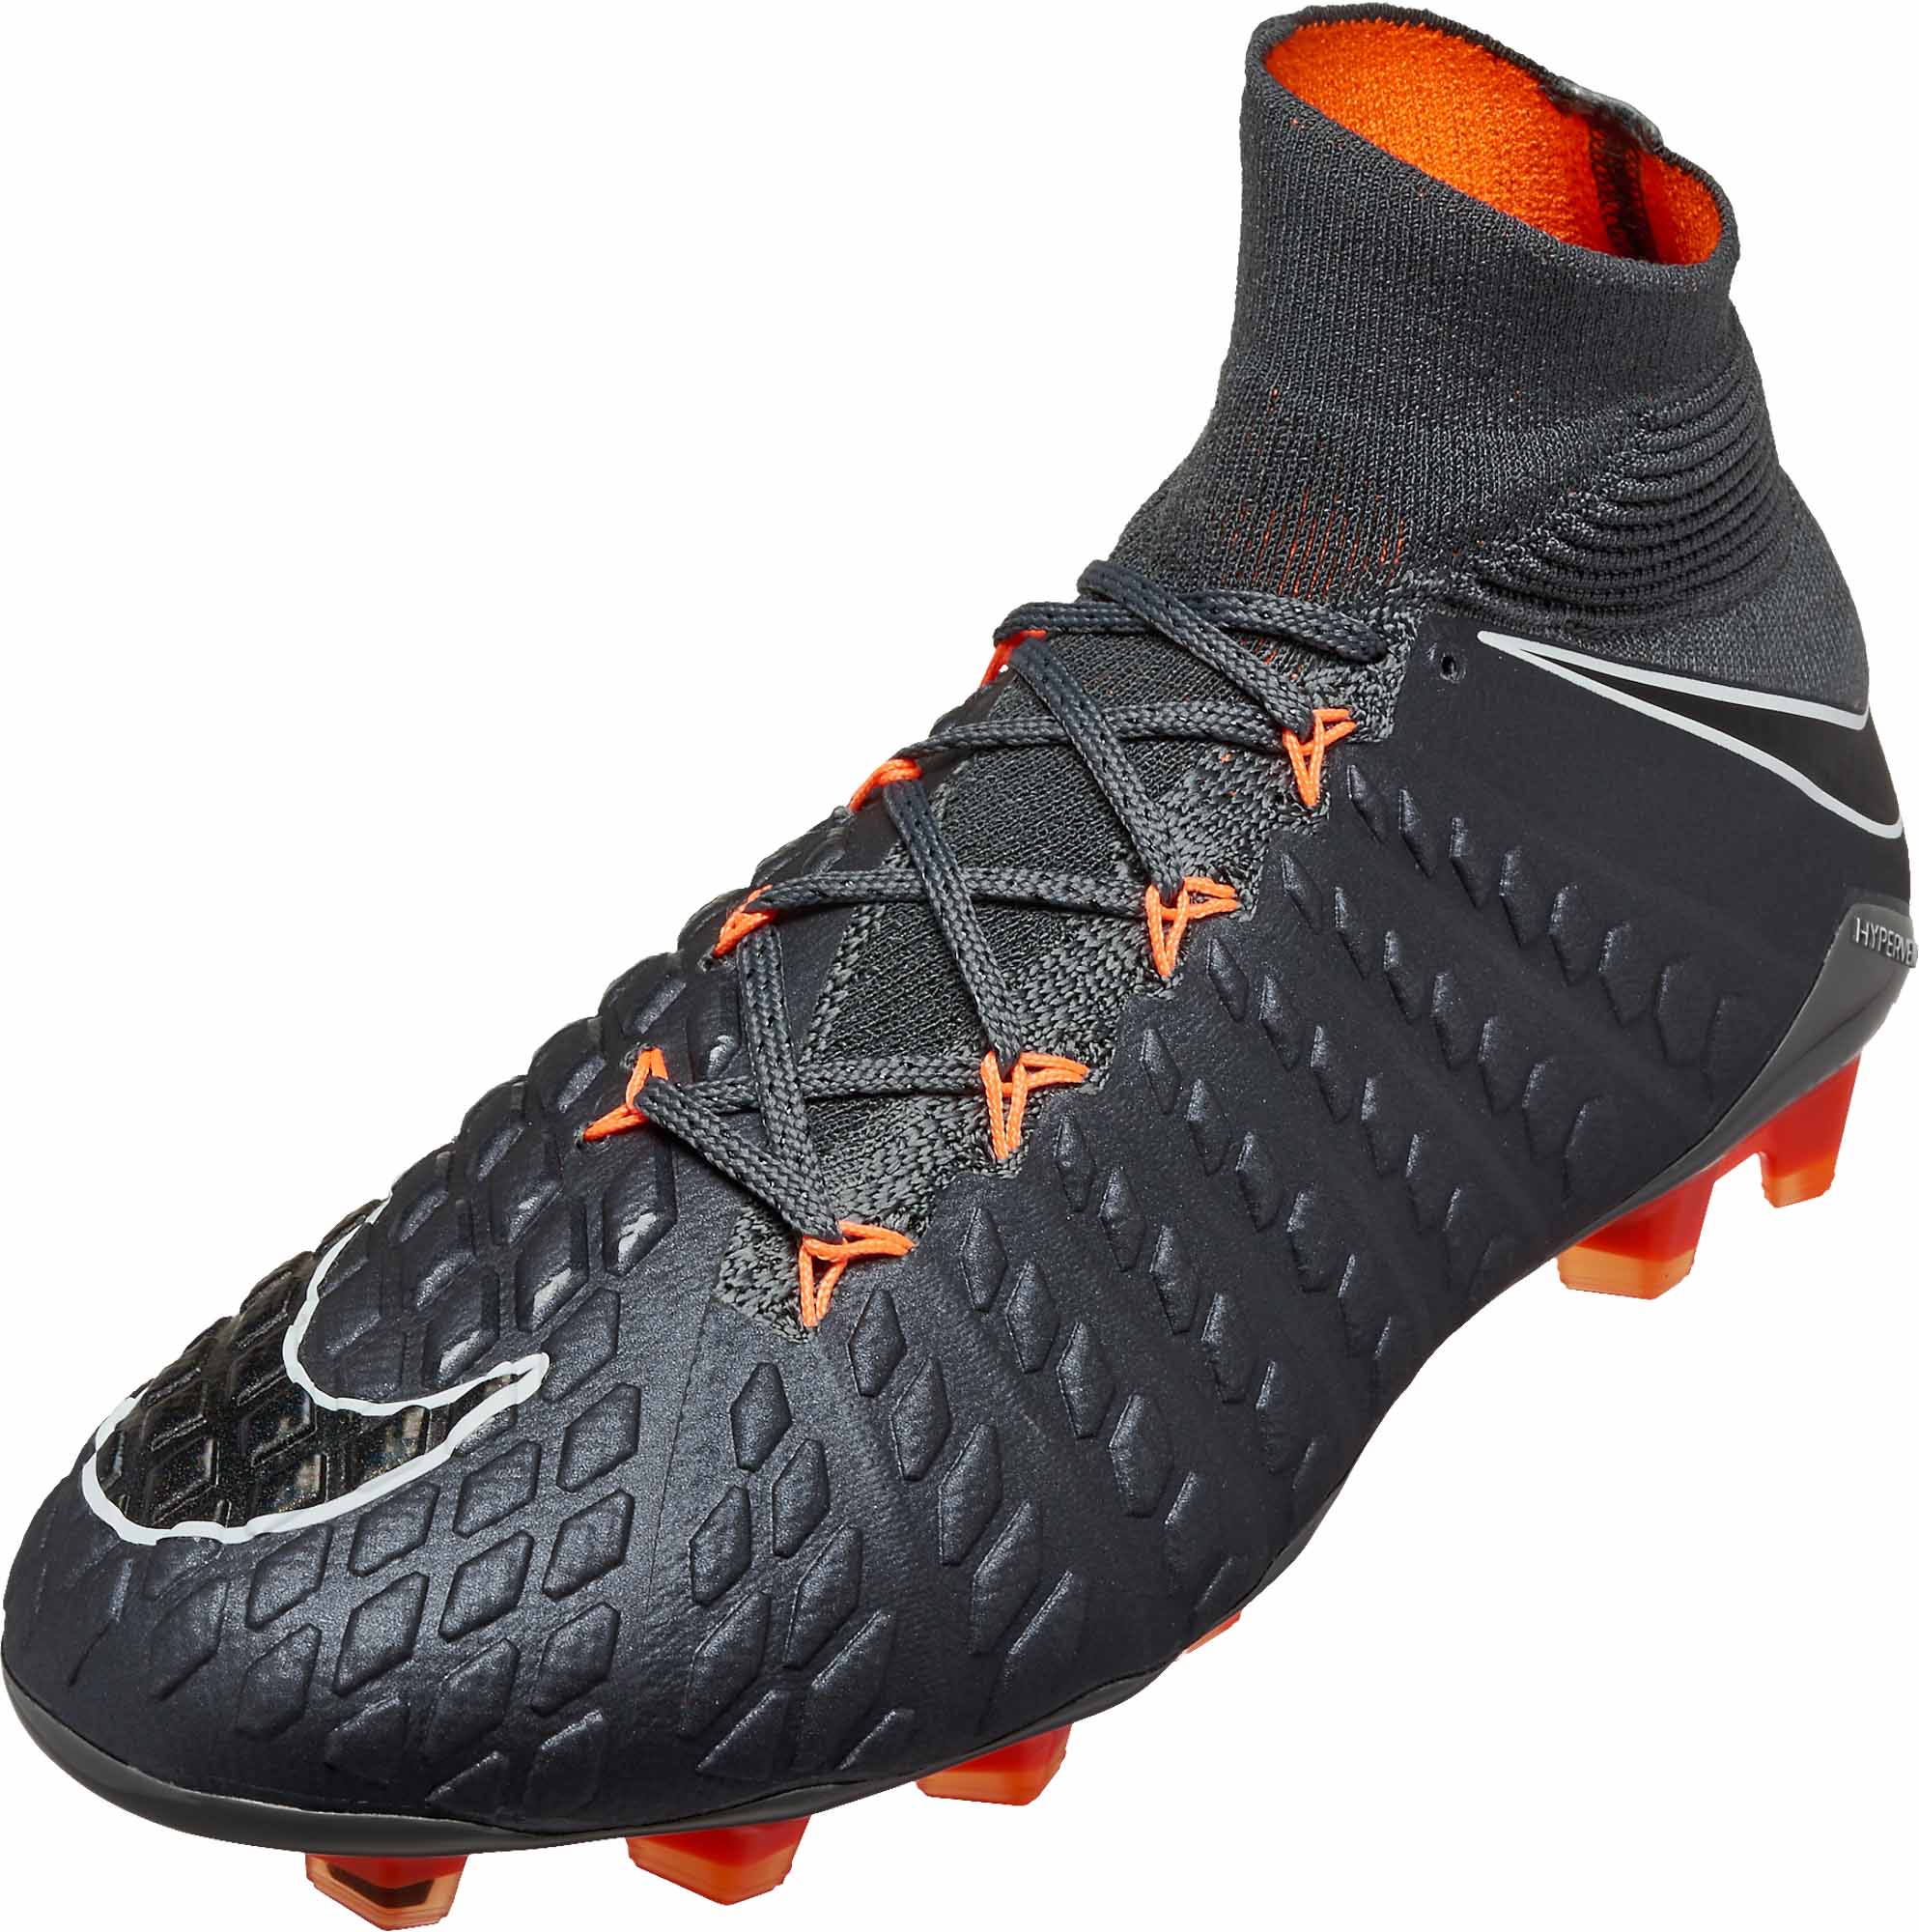 gray and orange soccer cleats